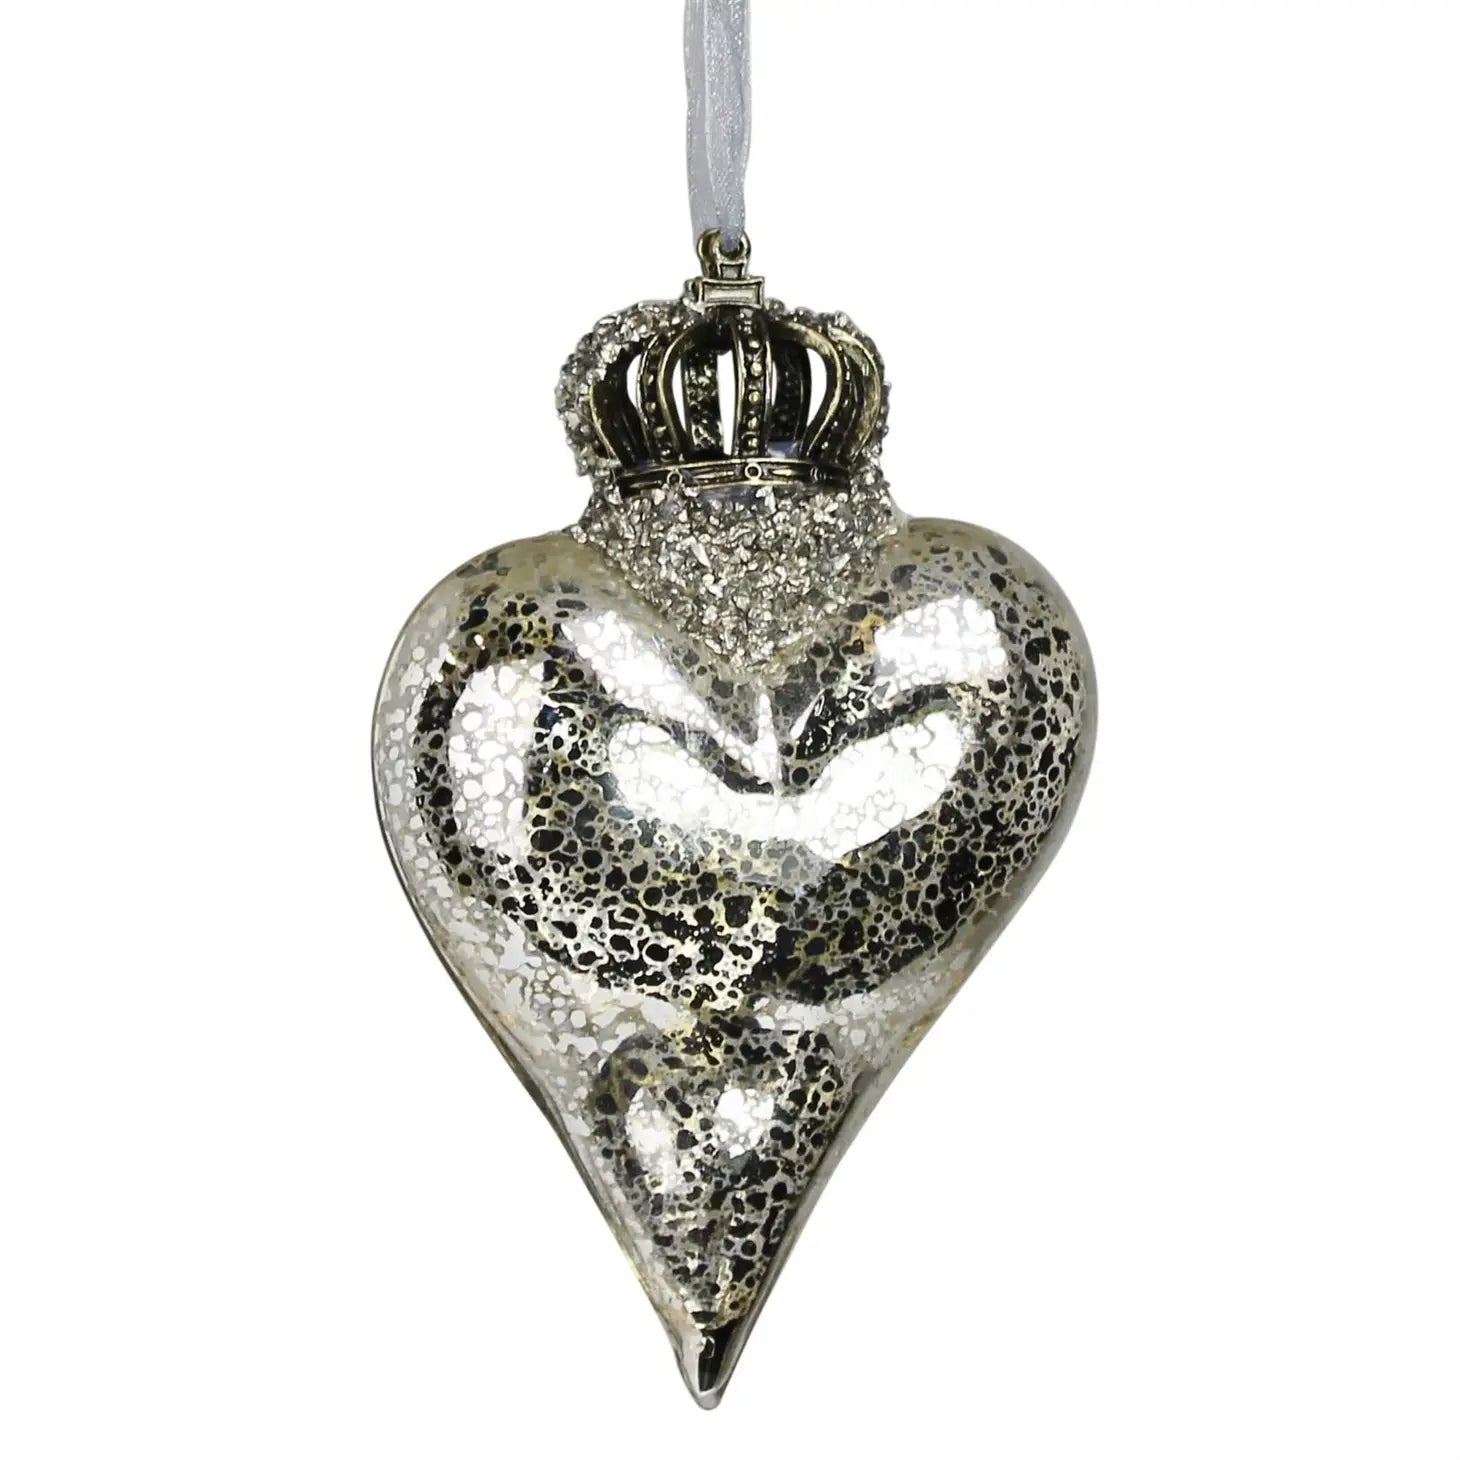 Ornament- Crowned Heart Silver